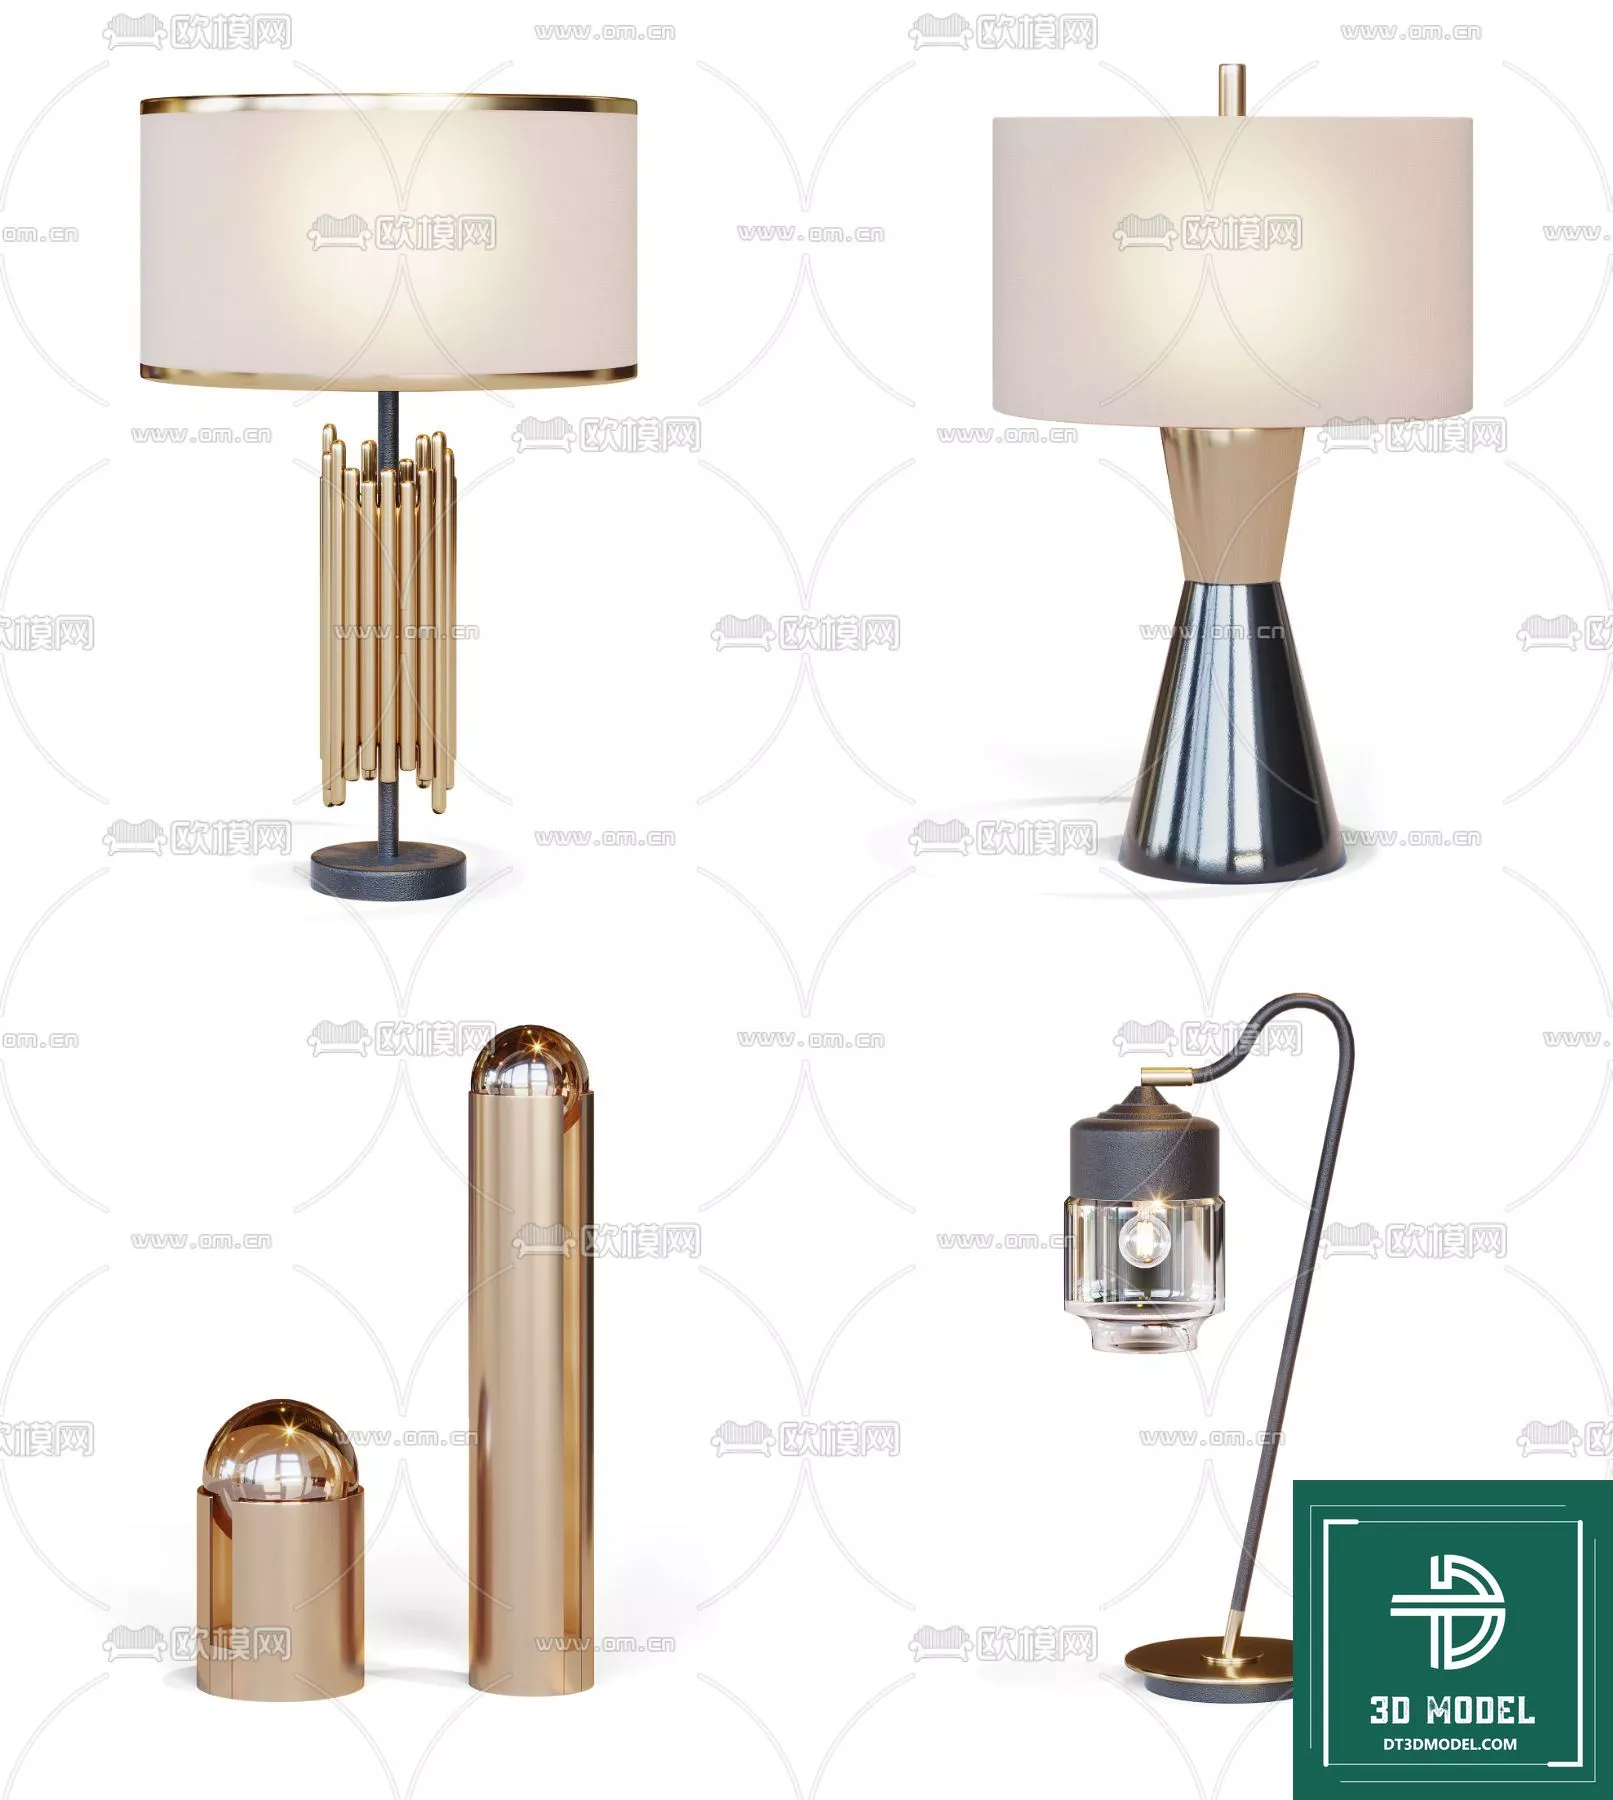 MODERN TABLE LAMP - SKETCHUP 3D MODEL - VRAY OR ENSCAPE - ID14557